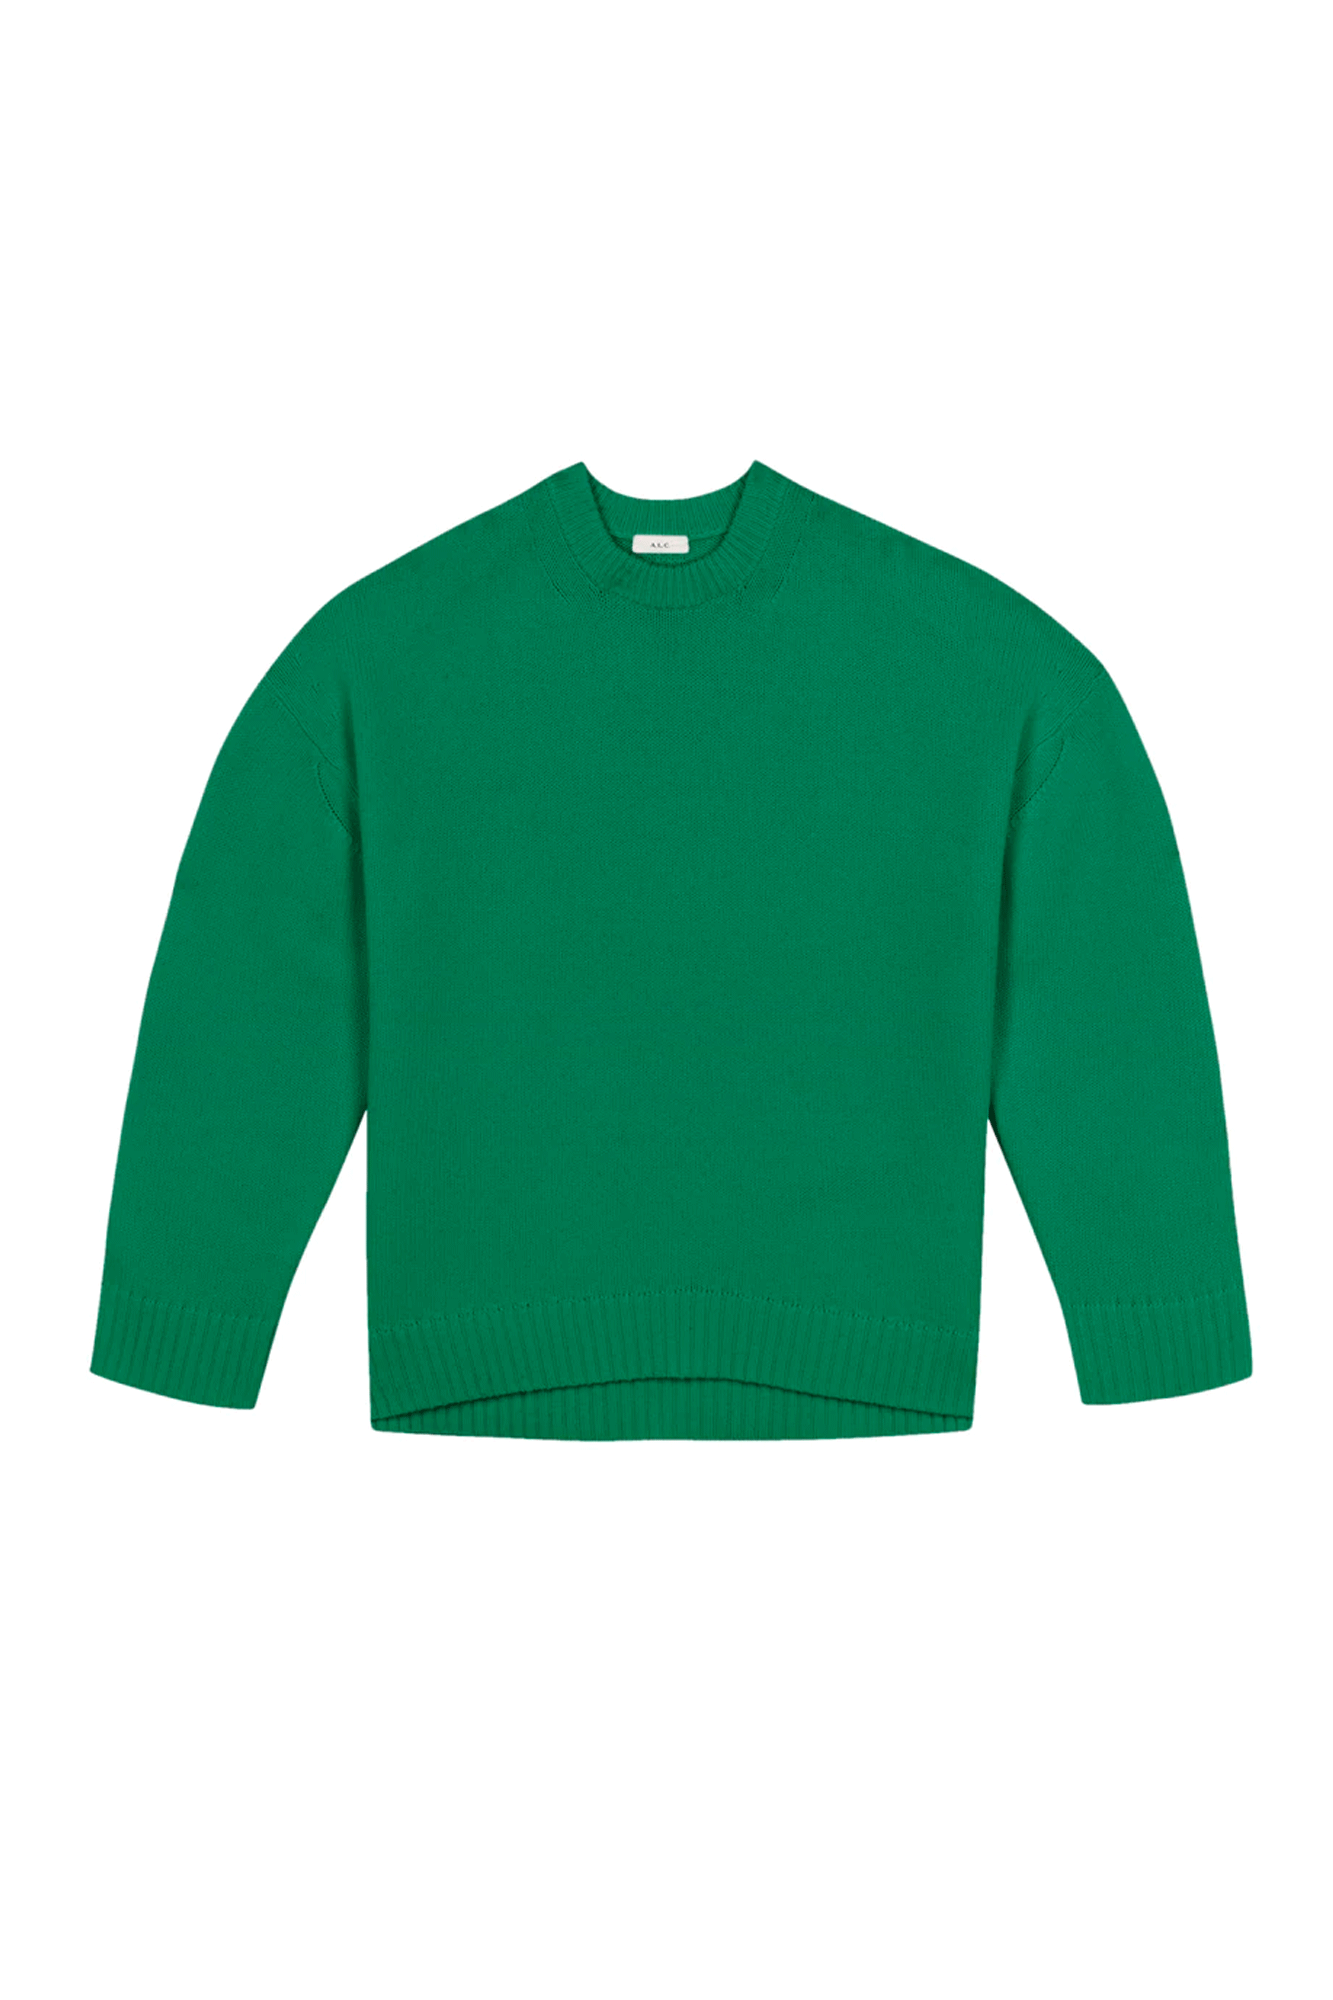 Experience luxury with the Ayden Sweater from A.L.C. Crafted from a woolen cashmere blend in rich green, this classic oversize silhouette features round neckline, dropped shoulders and ribbed cuffs & hemline. Enjoy the timeless elegance and refinement with the center stitched detailing down the back.